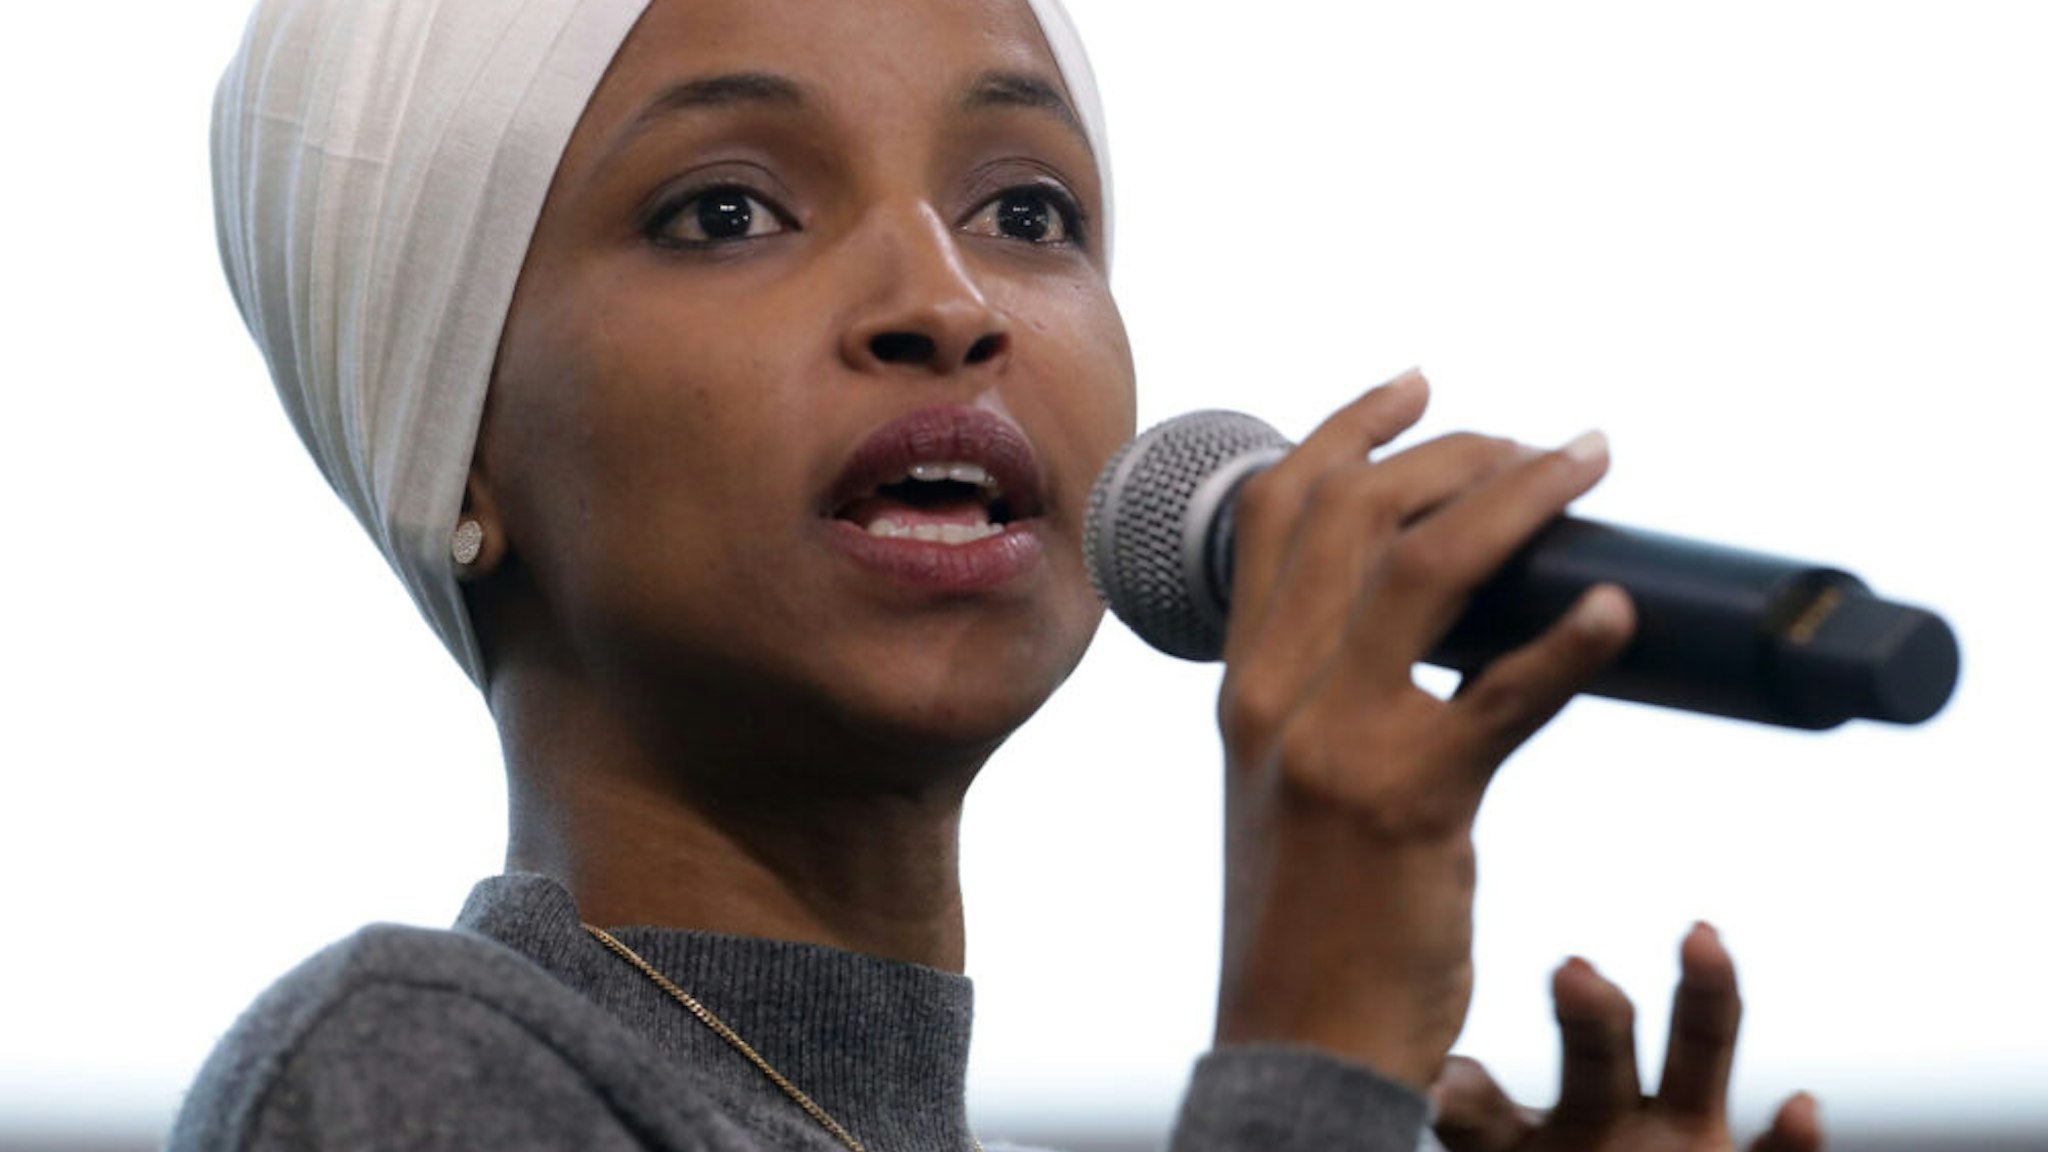 WASHINGTON, DC - JULY 23: Rep. Ilhan Omar (D-MN) participates in a panel discussion during the Muslim Collective For Equitable Democracy Conference and Presidential Forum at the The National Housing Center July 23, 2019 in Washington, DC. As a member of a group of four freshman Democratic women of color, known informally as 'The Squad,' Omar has been targeted by President Donald Trump with controversial Tweets during the last week.